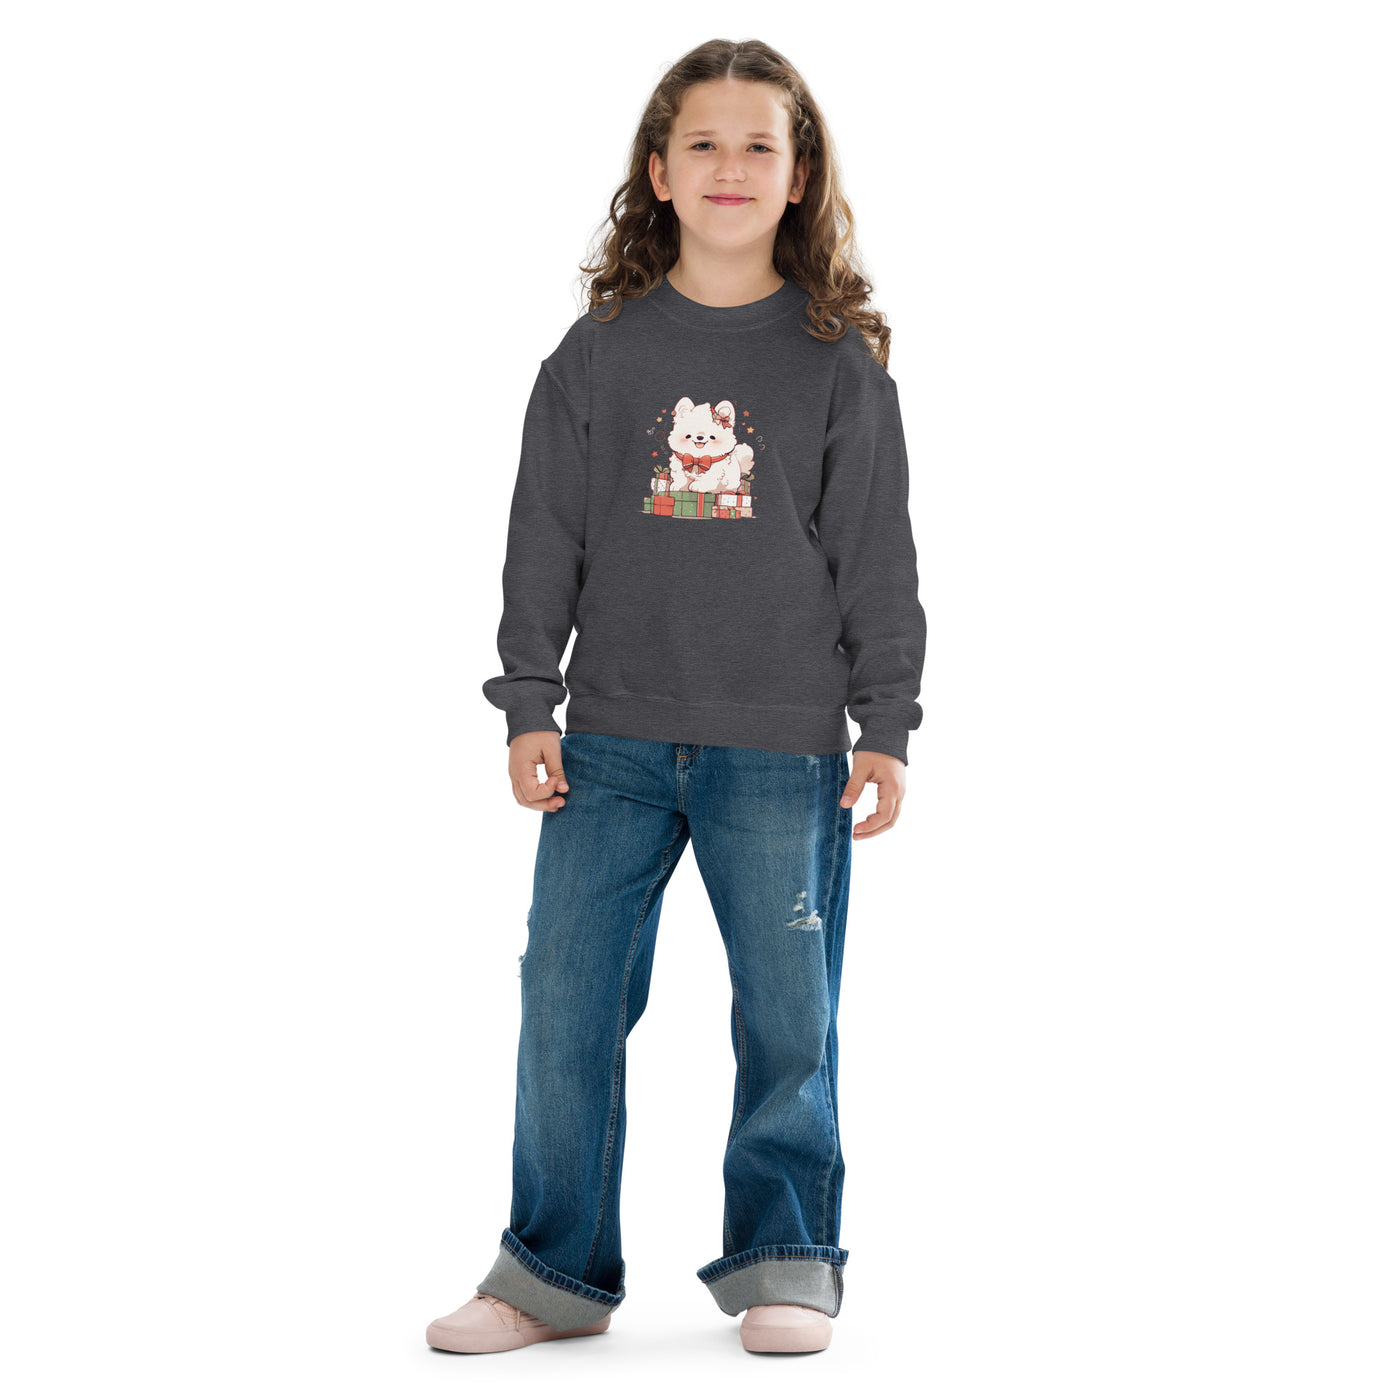 Dog Youth crewneck sweatshirtXS-XL Unisex - Coco Potato - dresses and partywear for little girls